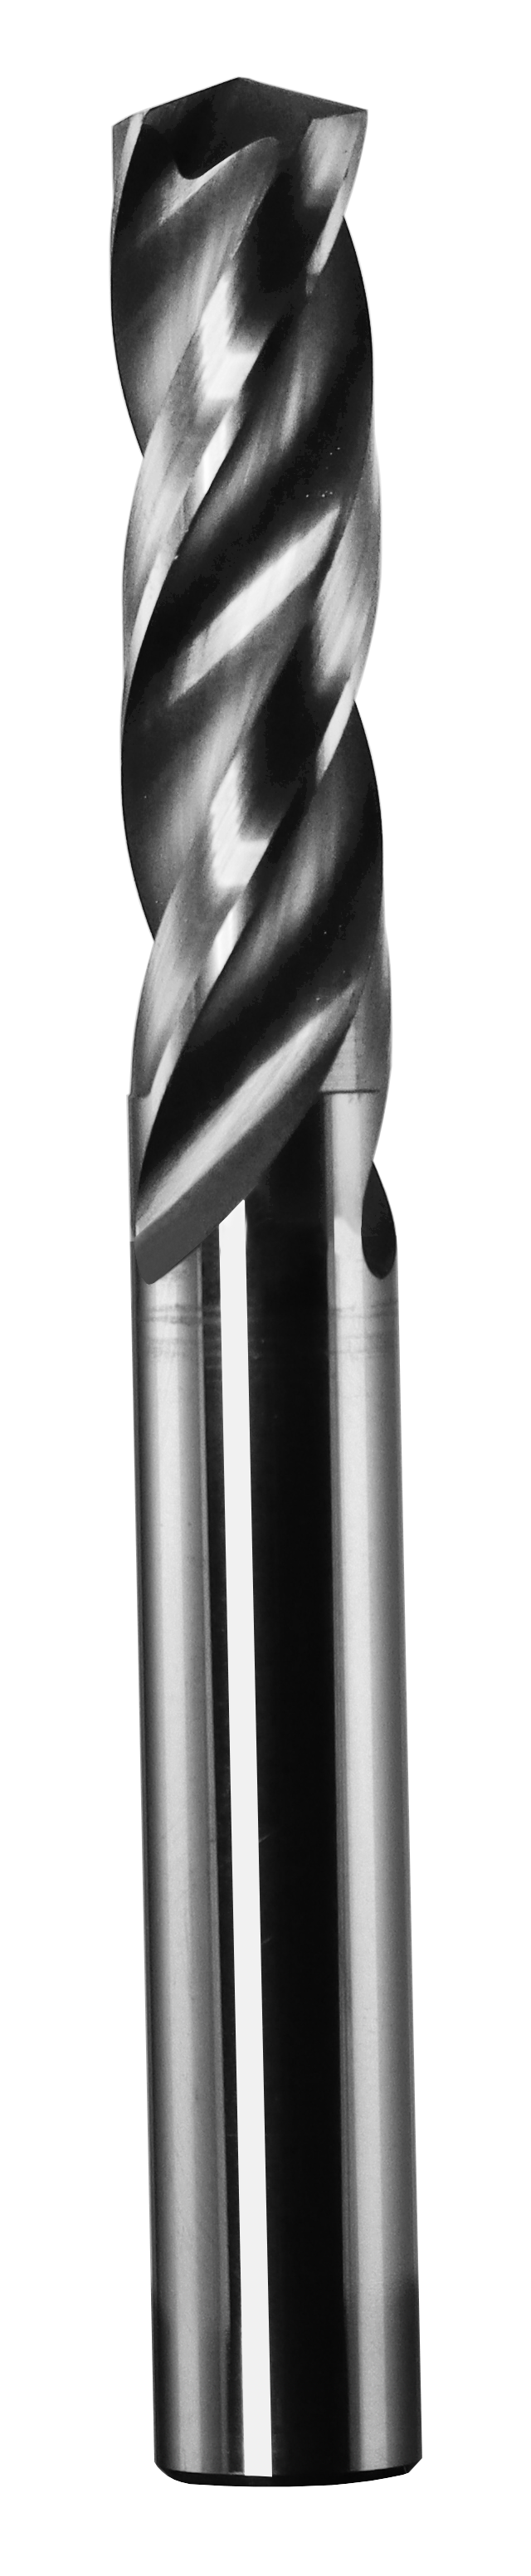 20.00mm Dia, 150 Degree Point, Solid Carbide Drill - 63043